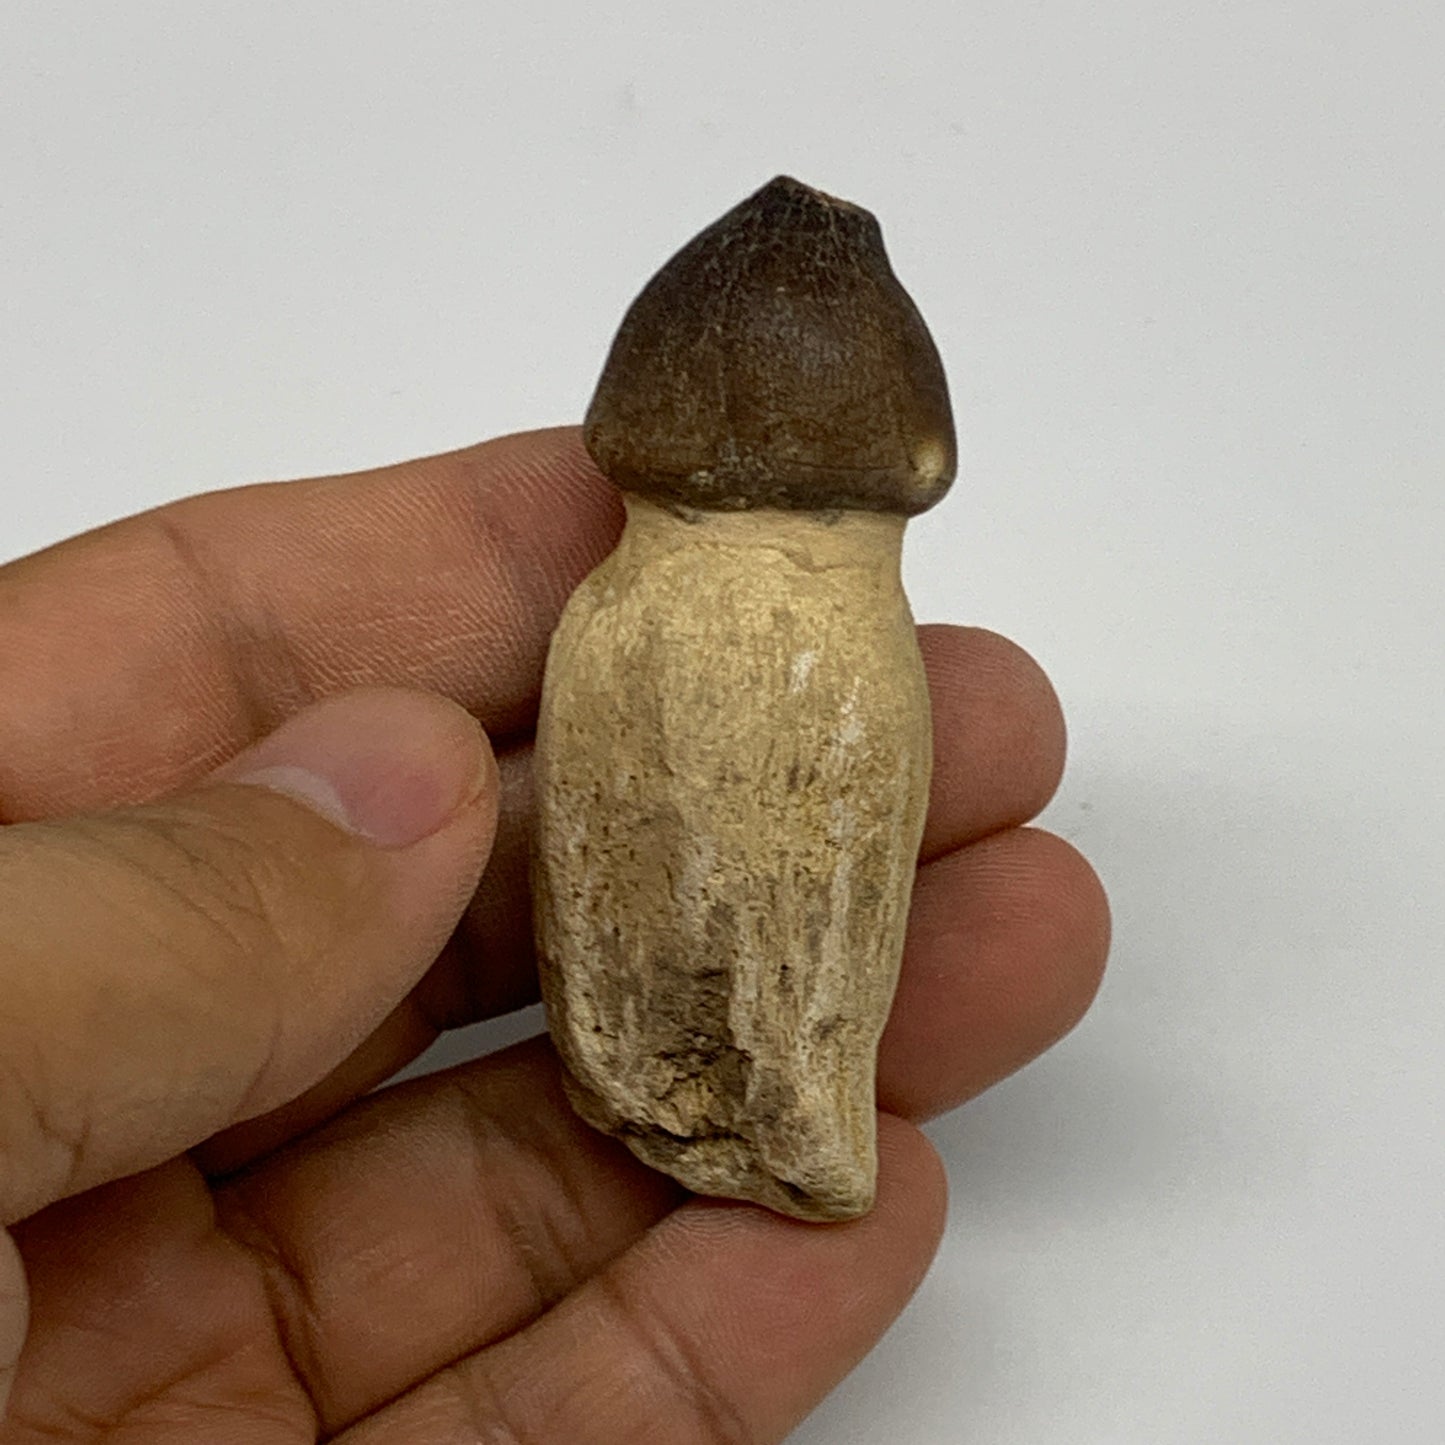 30.8g, 2.5"X1"x0.8" Fossil Globidens phosphaticus (Mosasaur ) Tooth, Cretaceous,